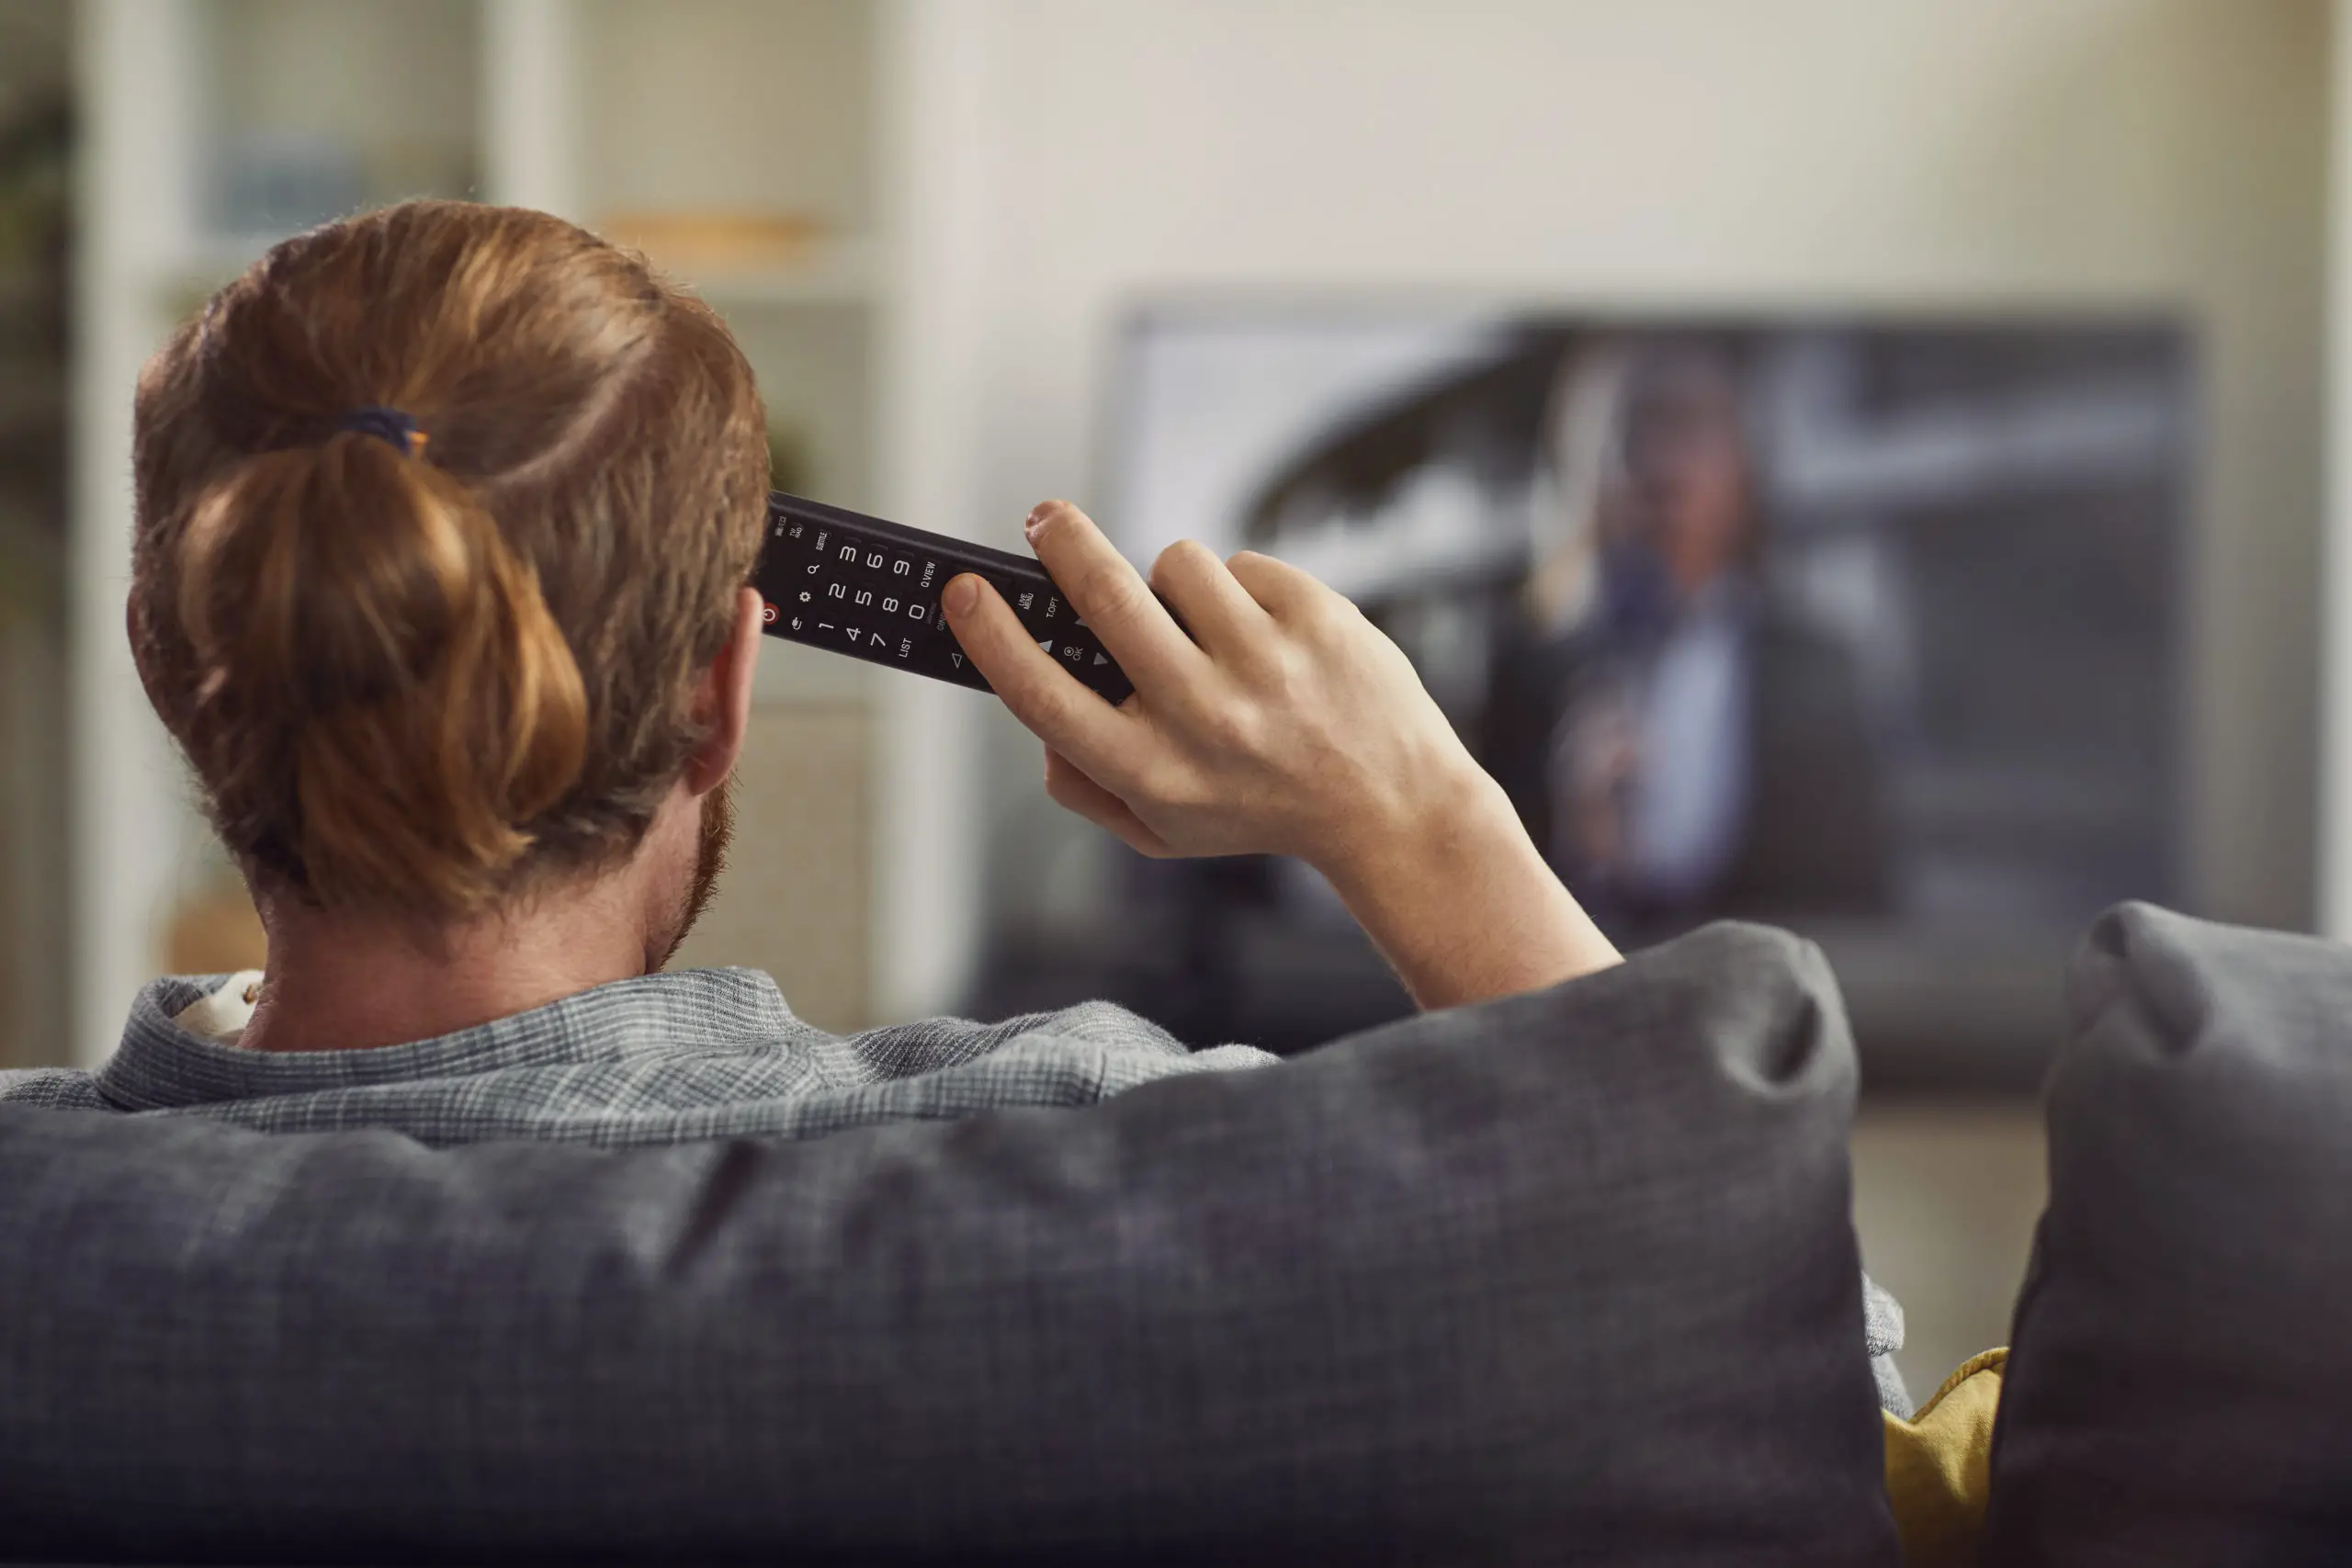 Having Humax Freeview tuning problems? Here's how to do ithttps://elements.envato.com/man-watching-tv-rear-view-UBANJ79